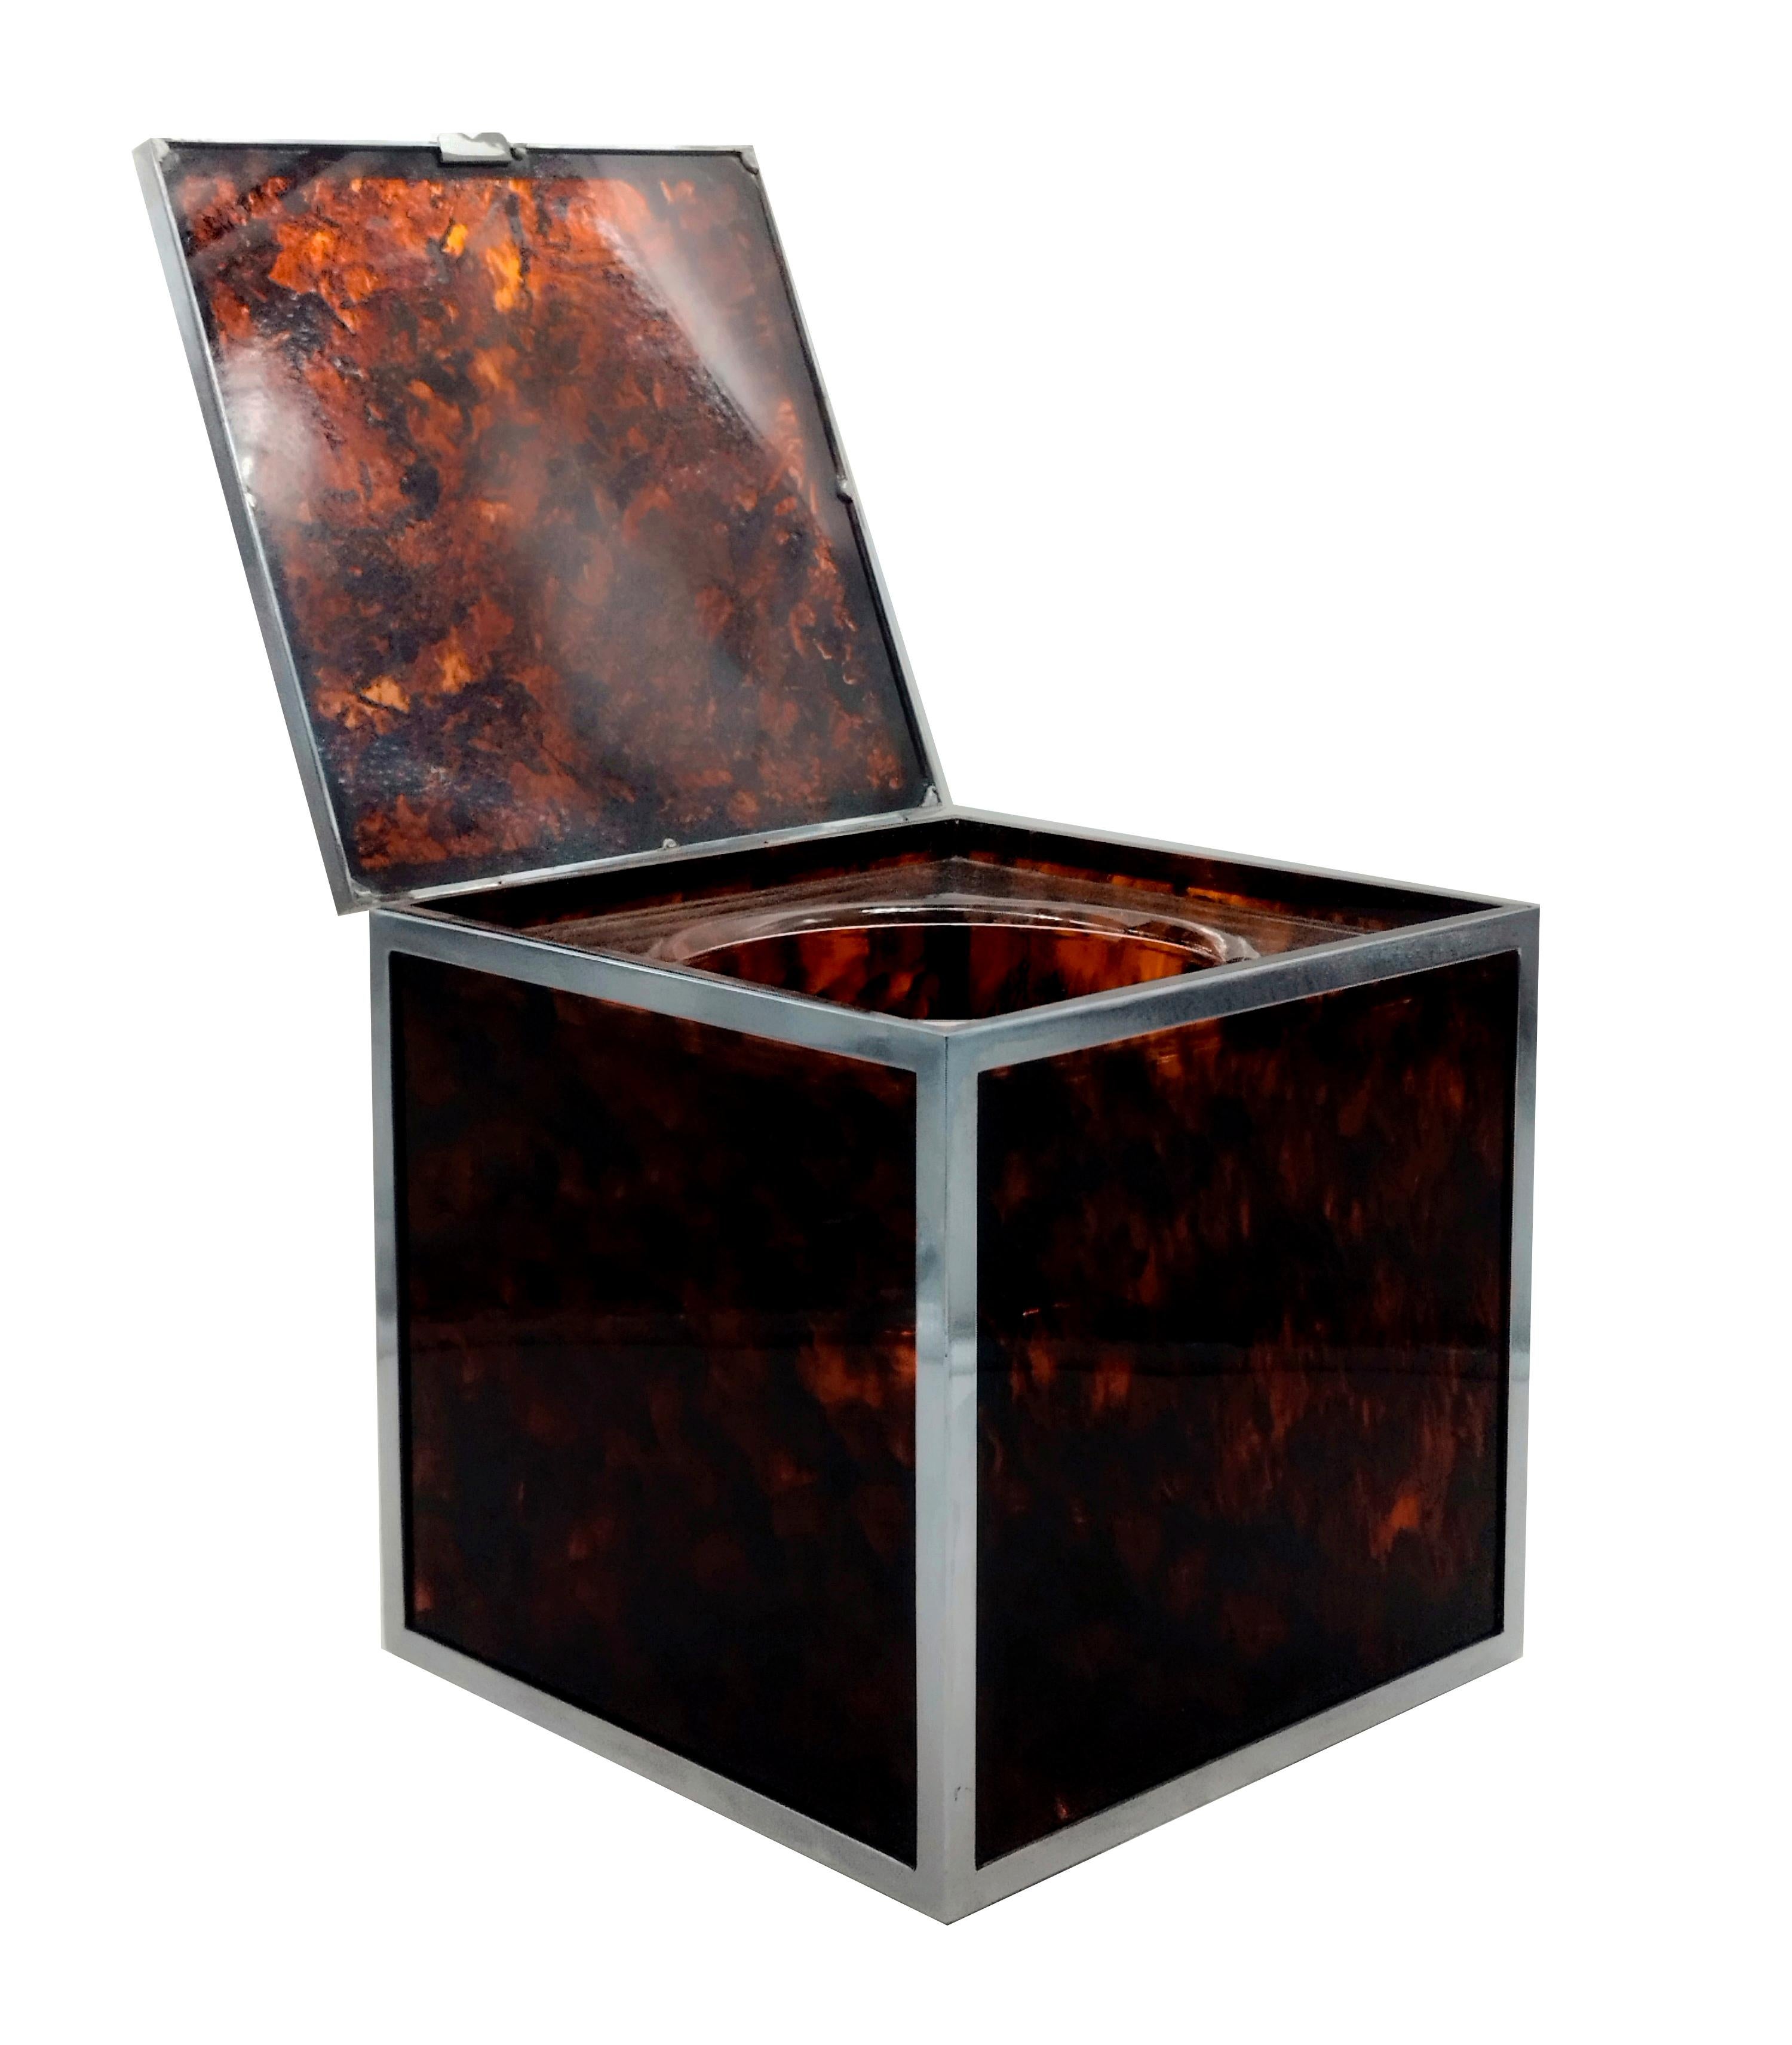 Cubic ice bucket in tortoiseshell-effect acrylic with chrome edges in the Christian Dior style. Made in Italy in the 1970s.